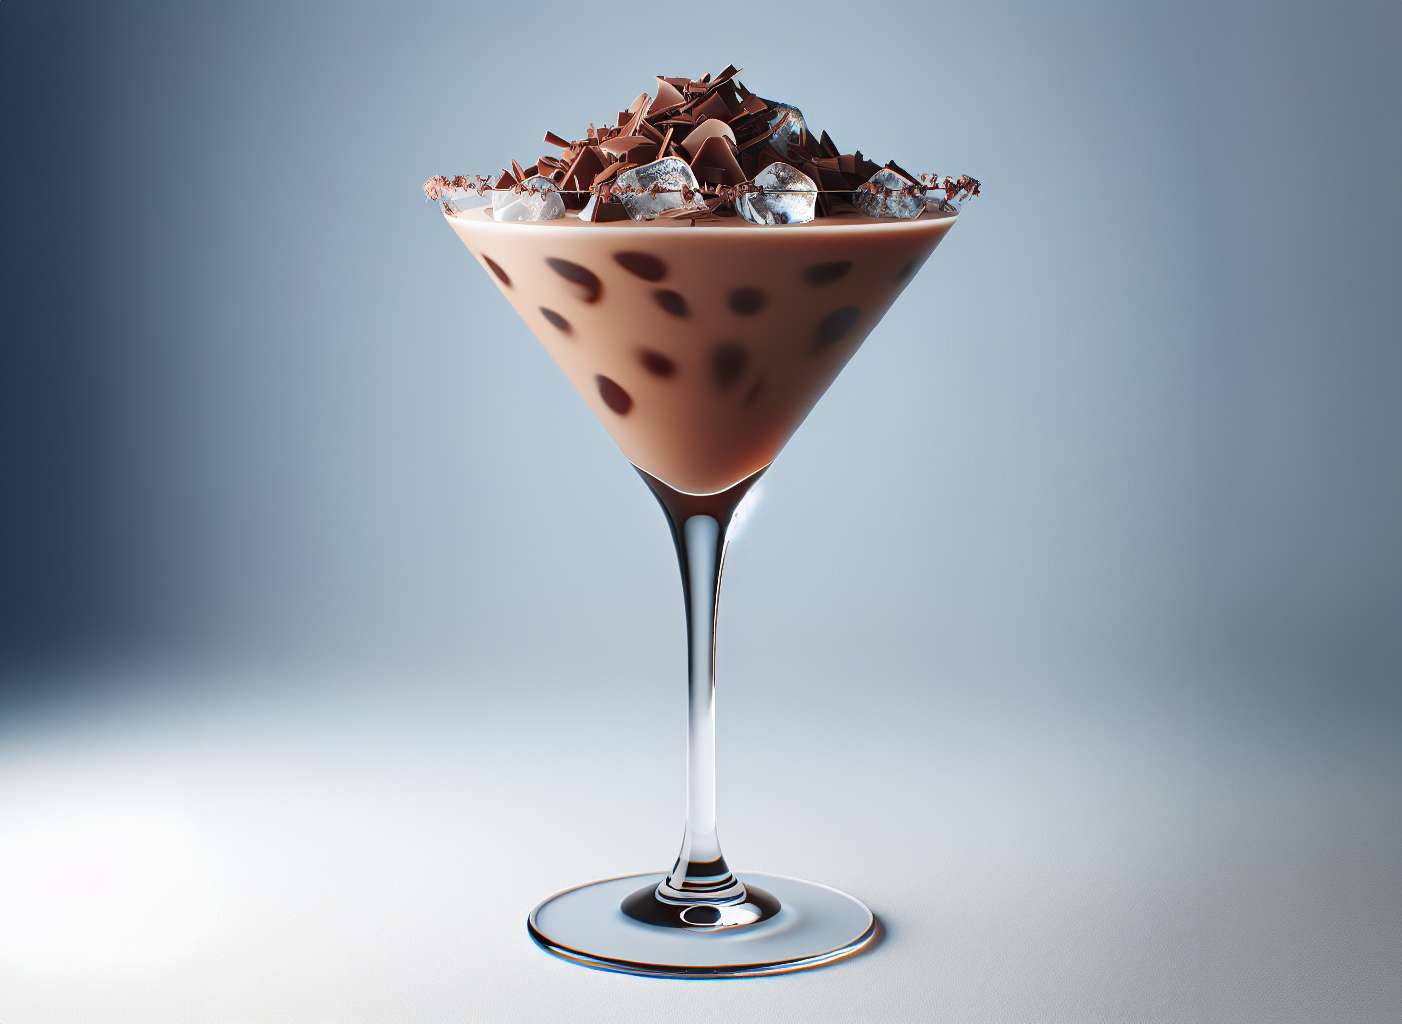 A martini glass filled with a creamy, chocolate drink topped with shards of chocolate and ice cubes.